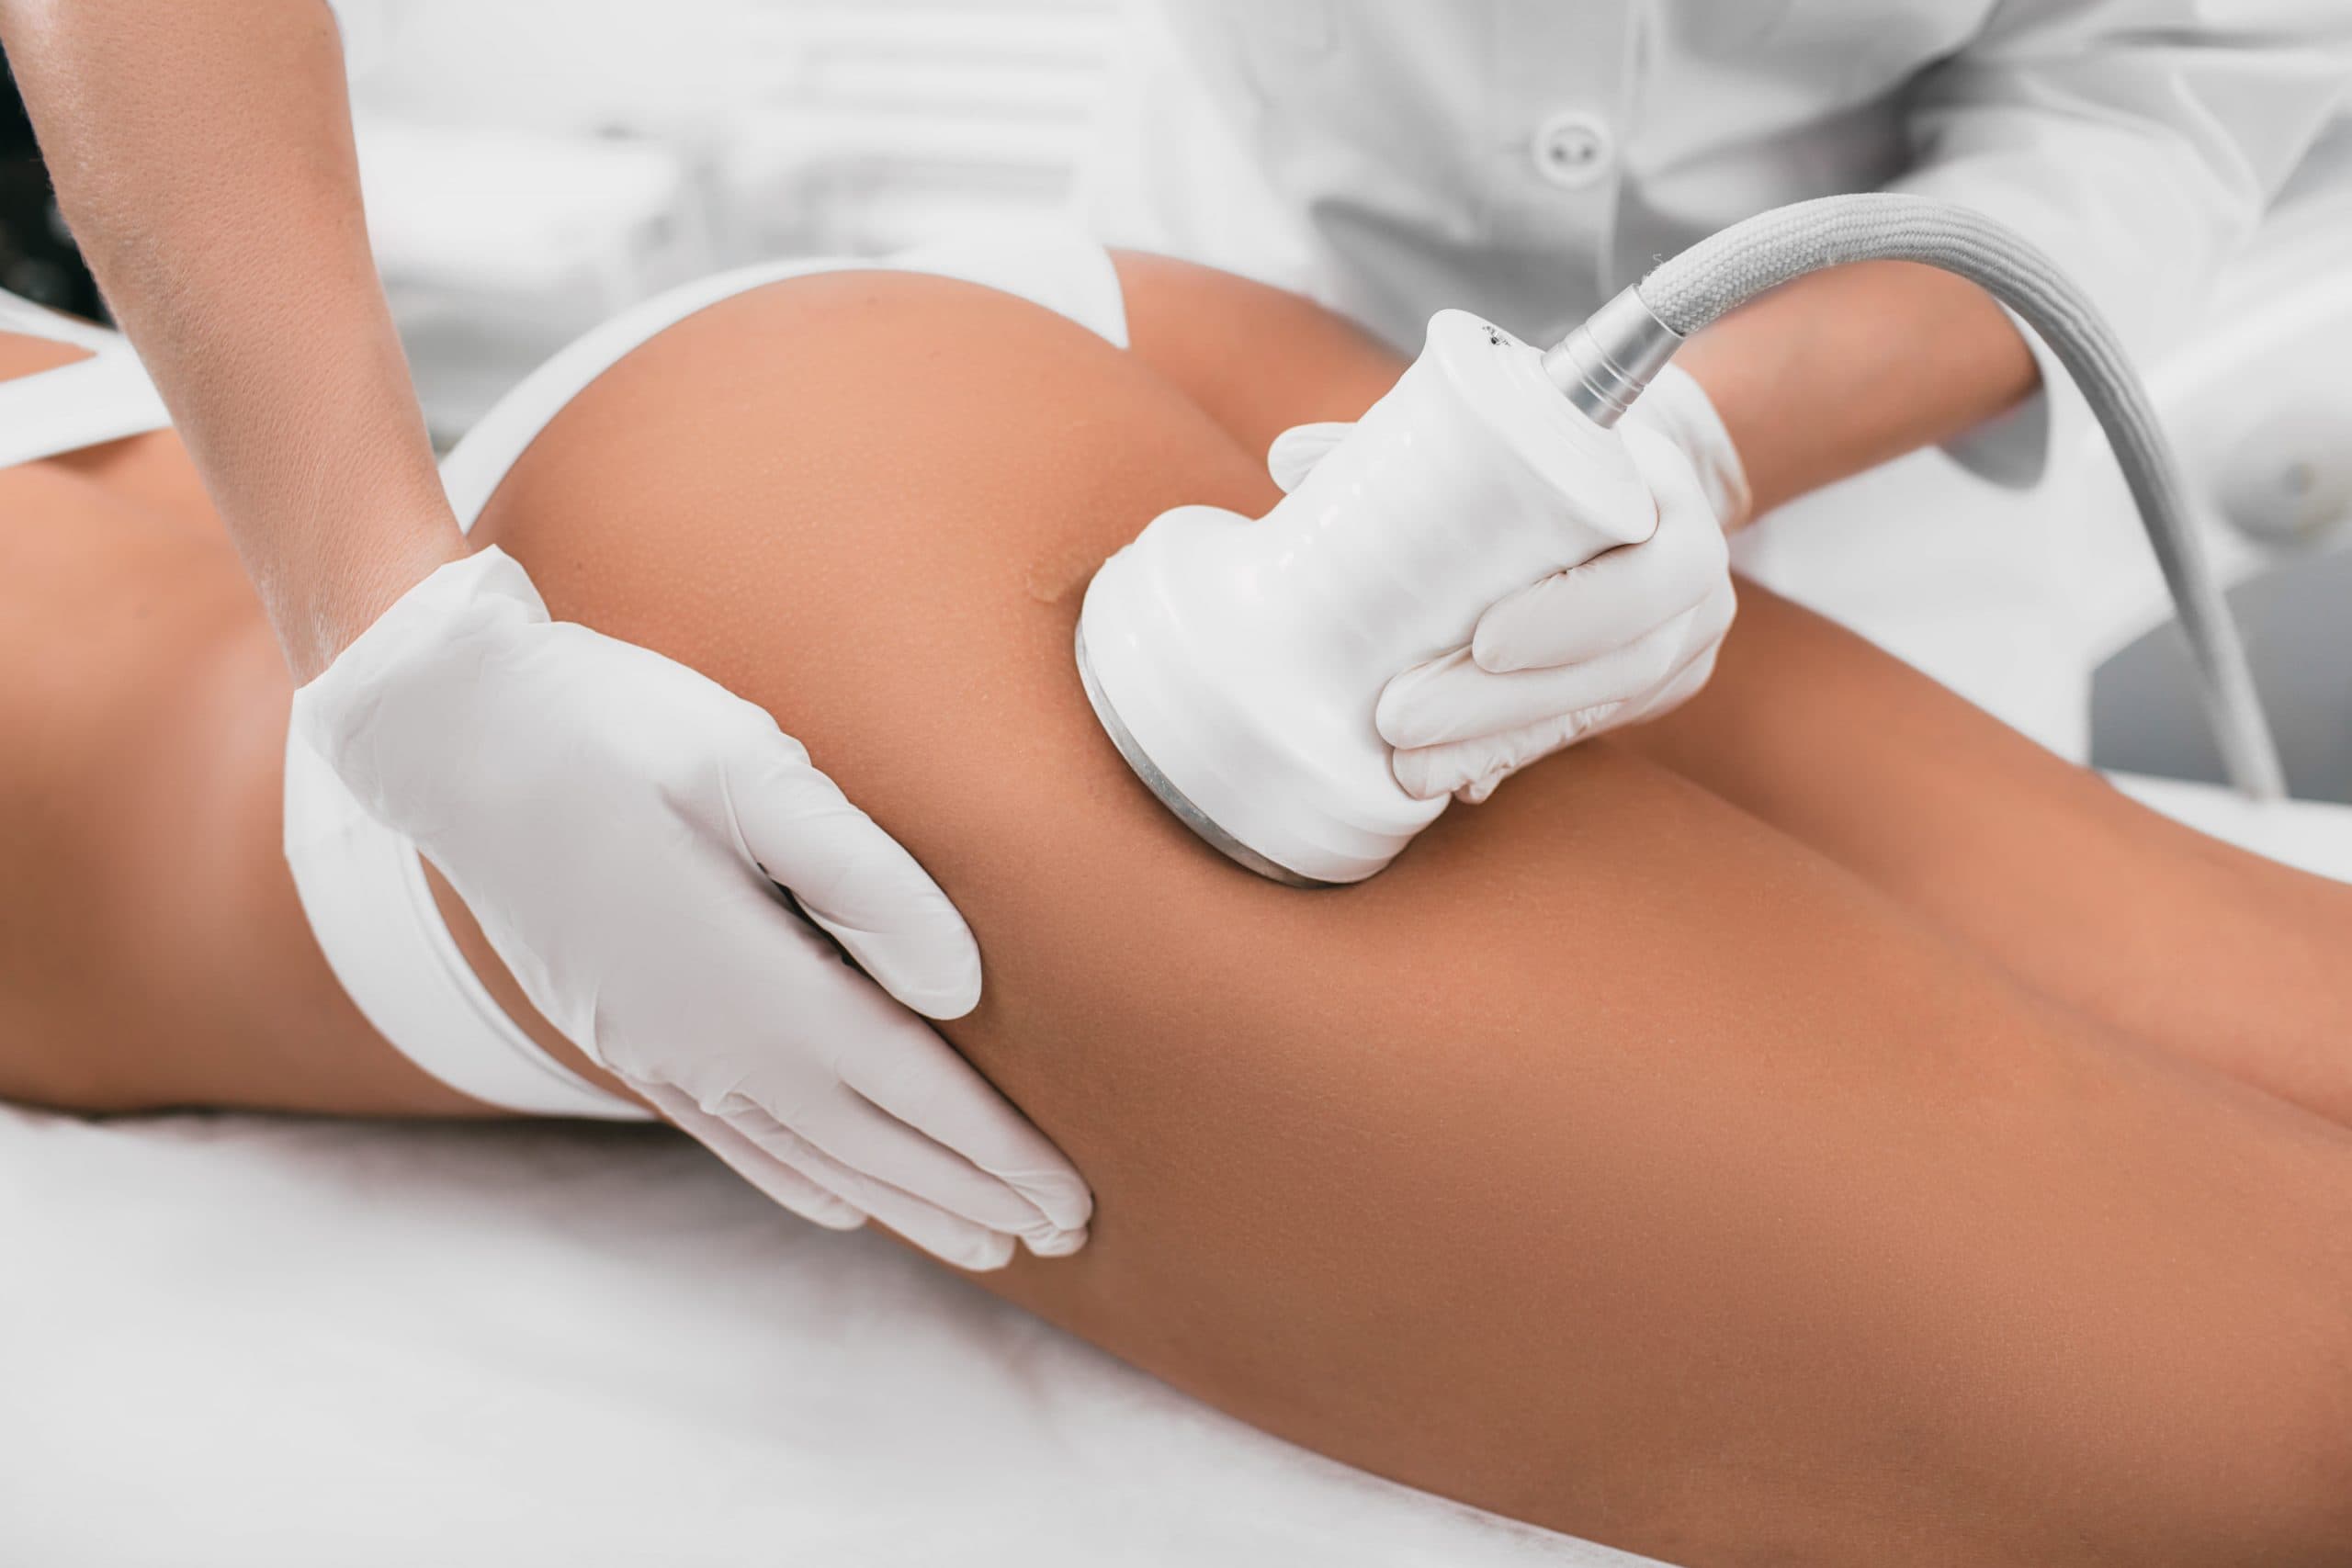 Ultrasound Liposuction All You Need To Know